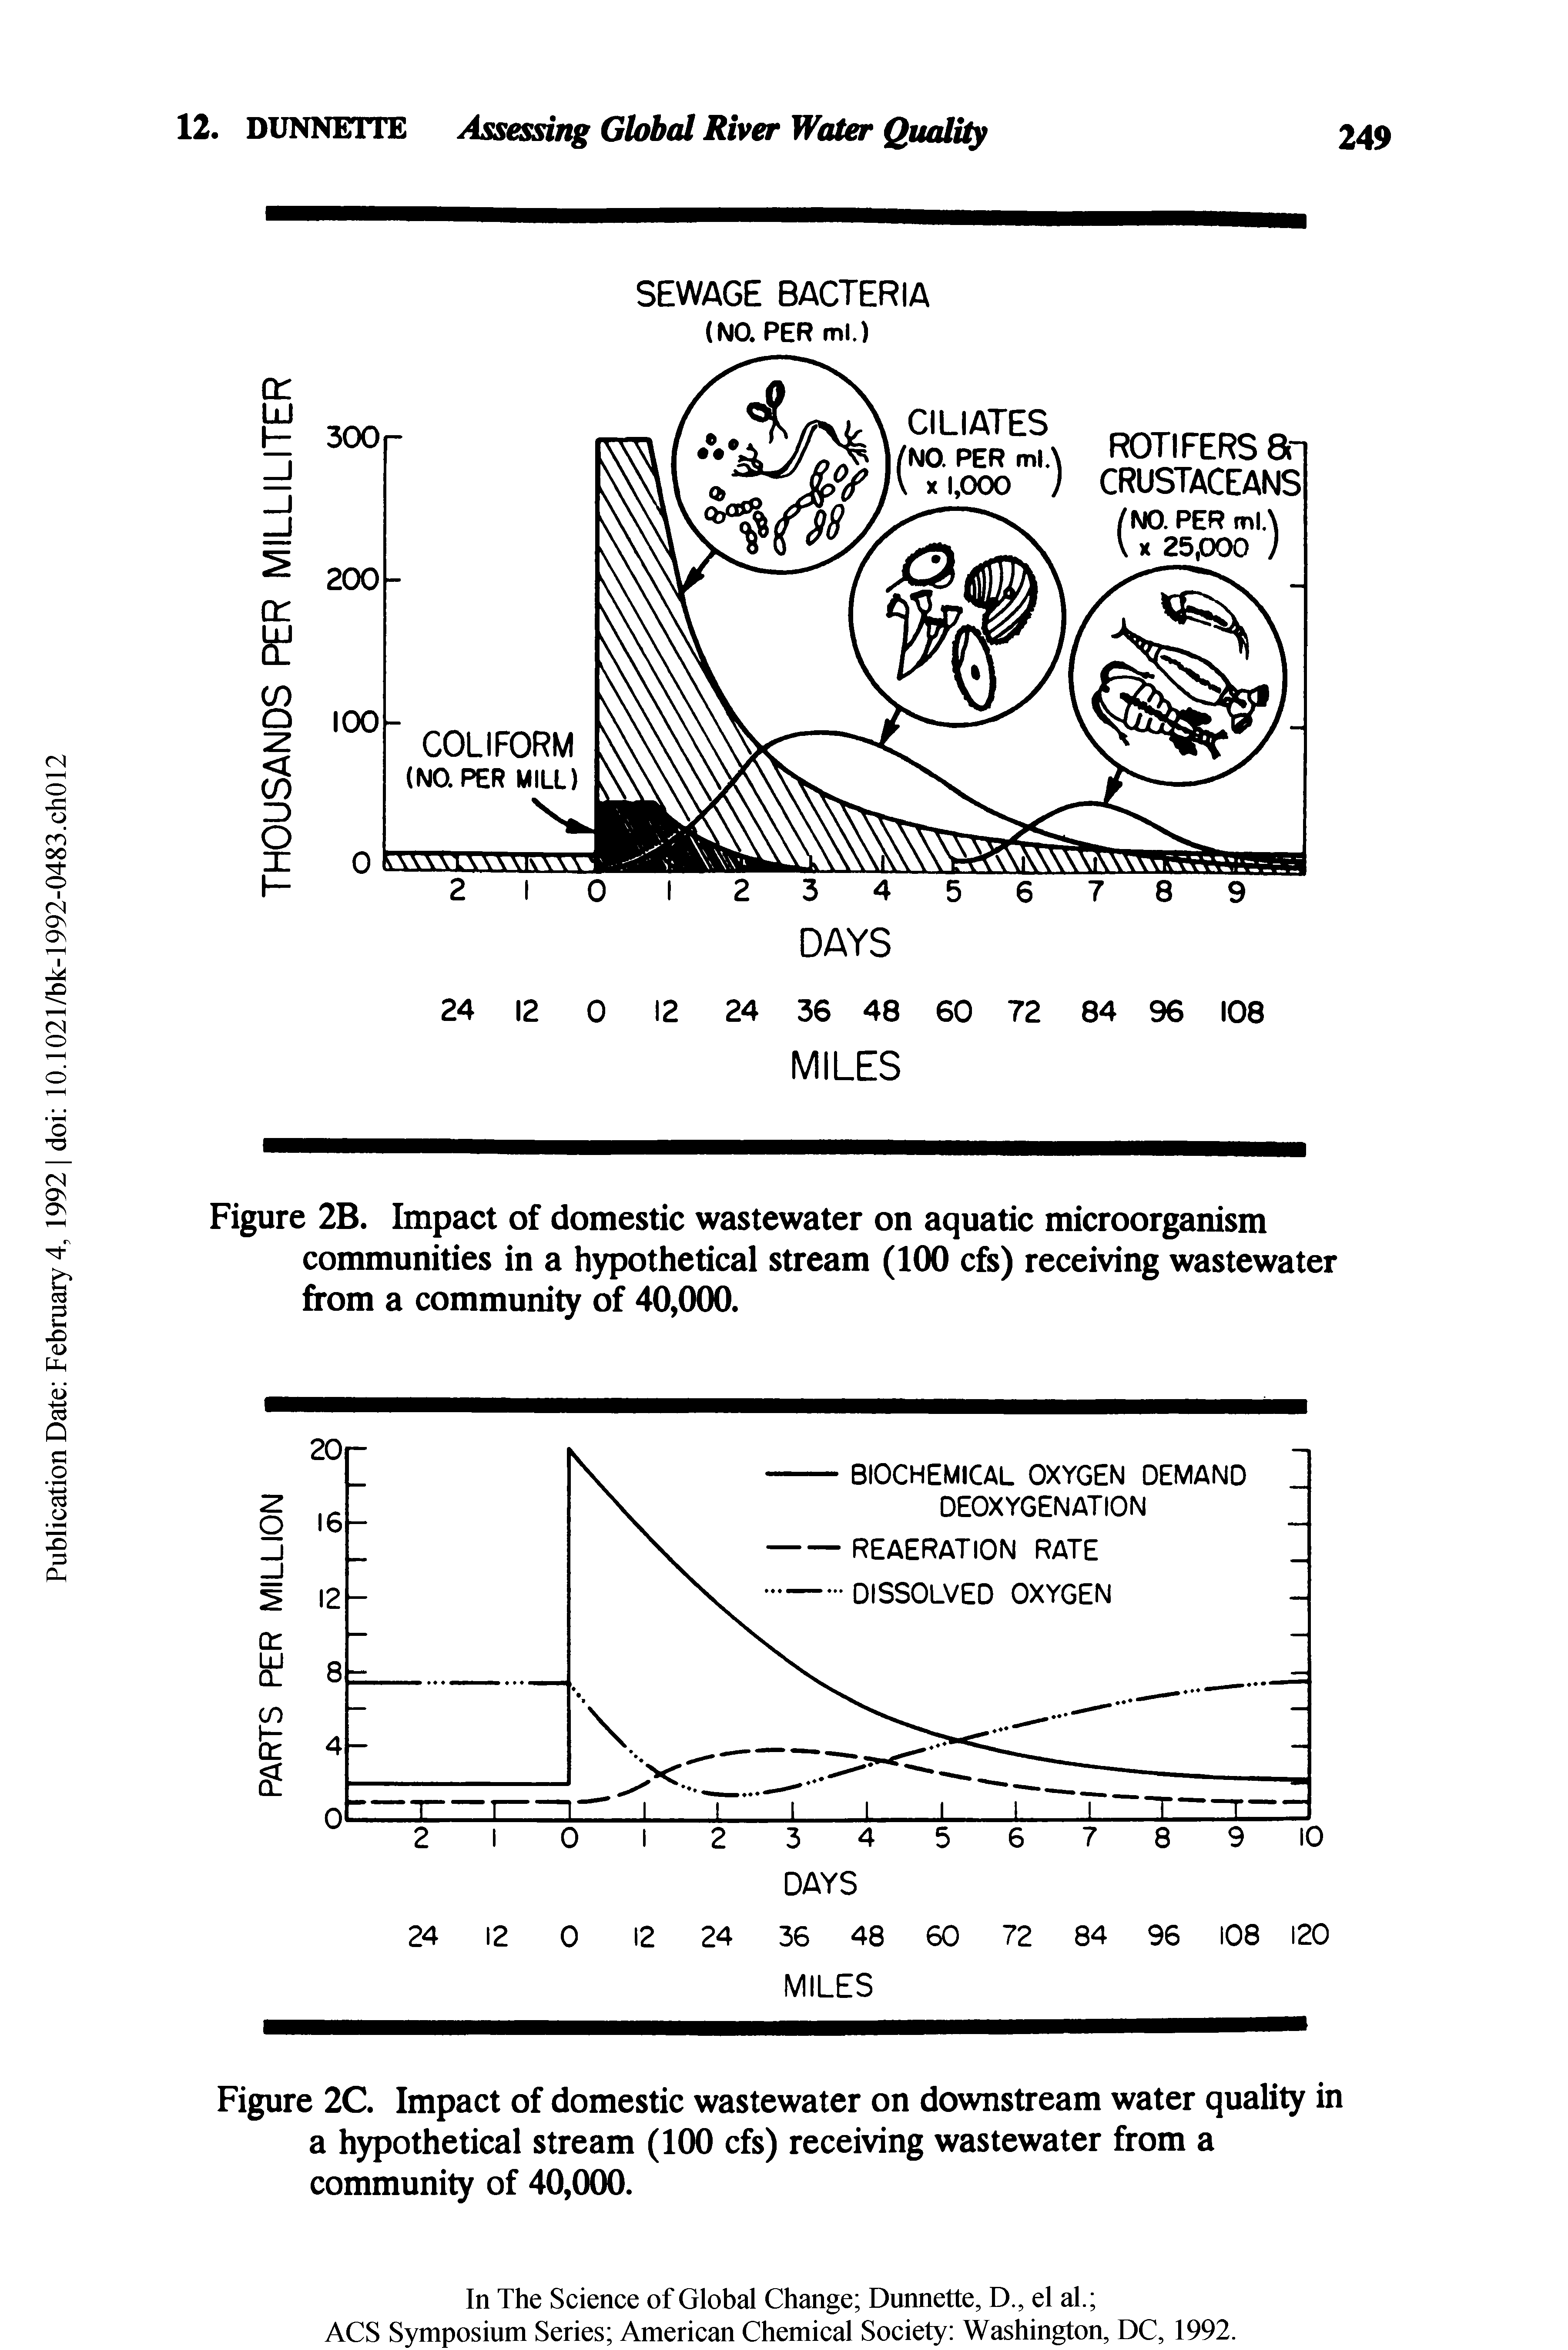 Figure 2C. Impact of domestic wastewater on downstream water quality in a hypothetical stream (100 cfs) receiving wastewater from a community of 40,000.